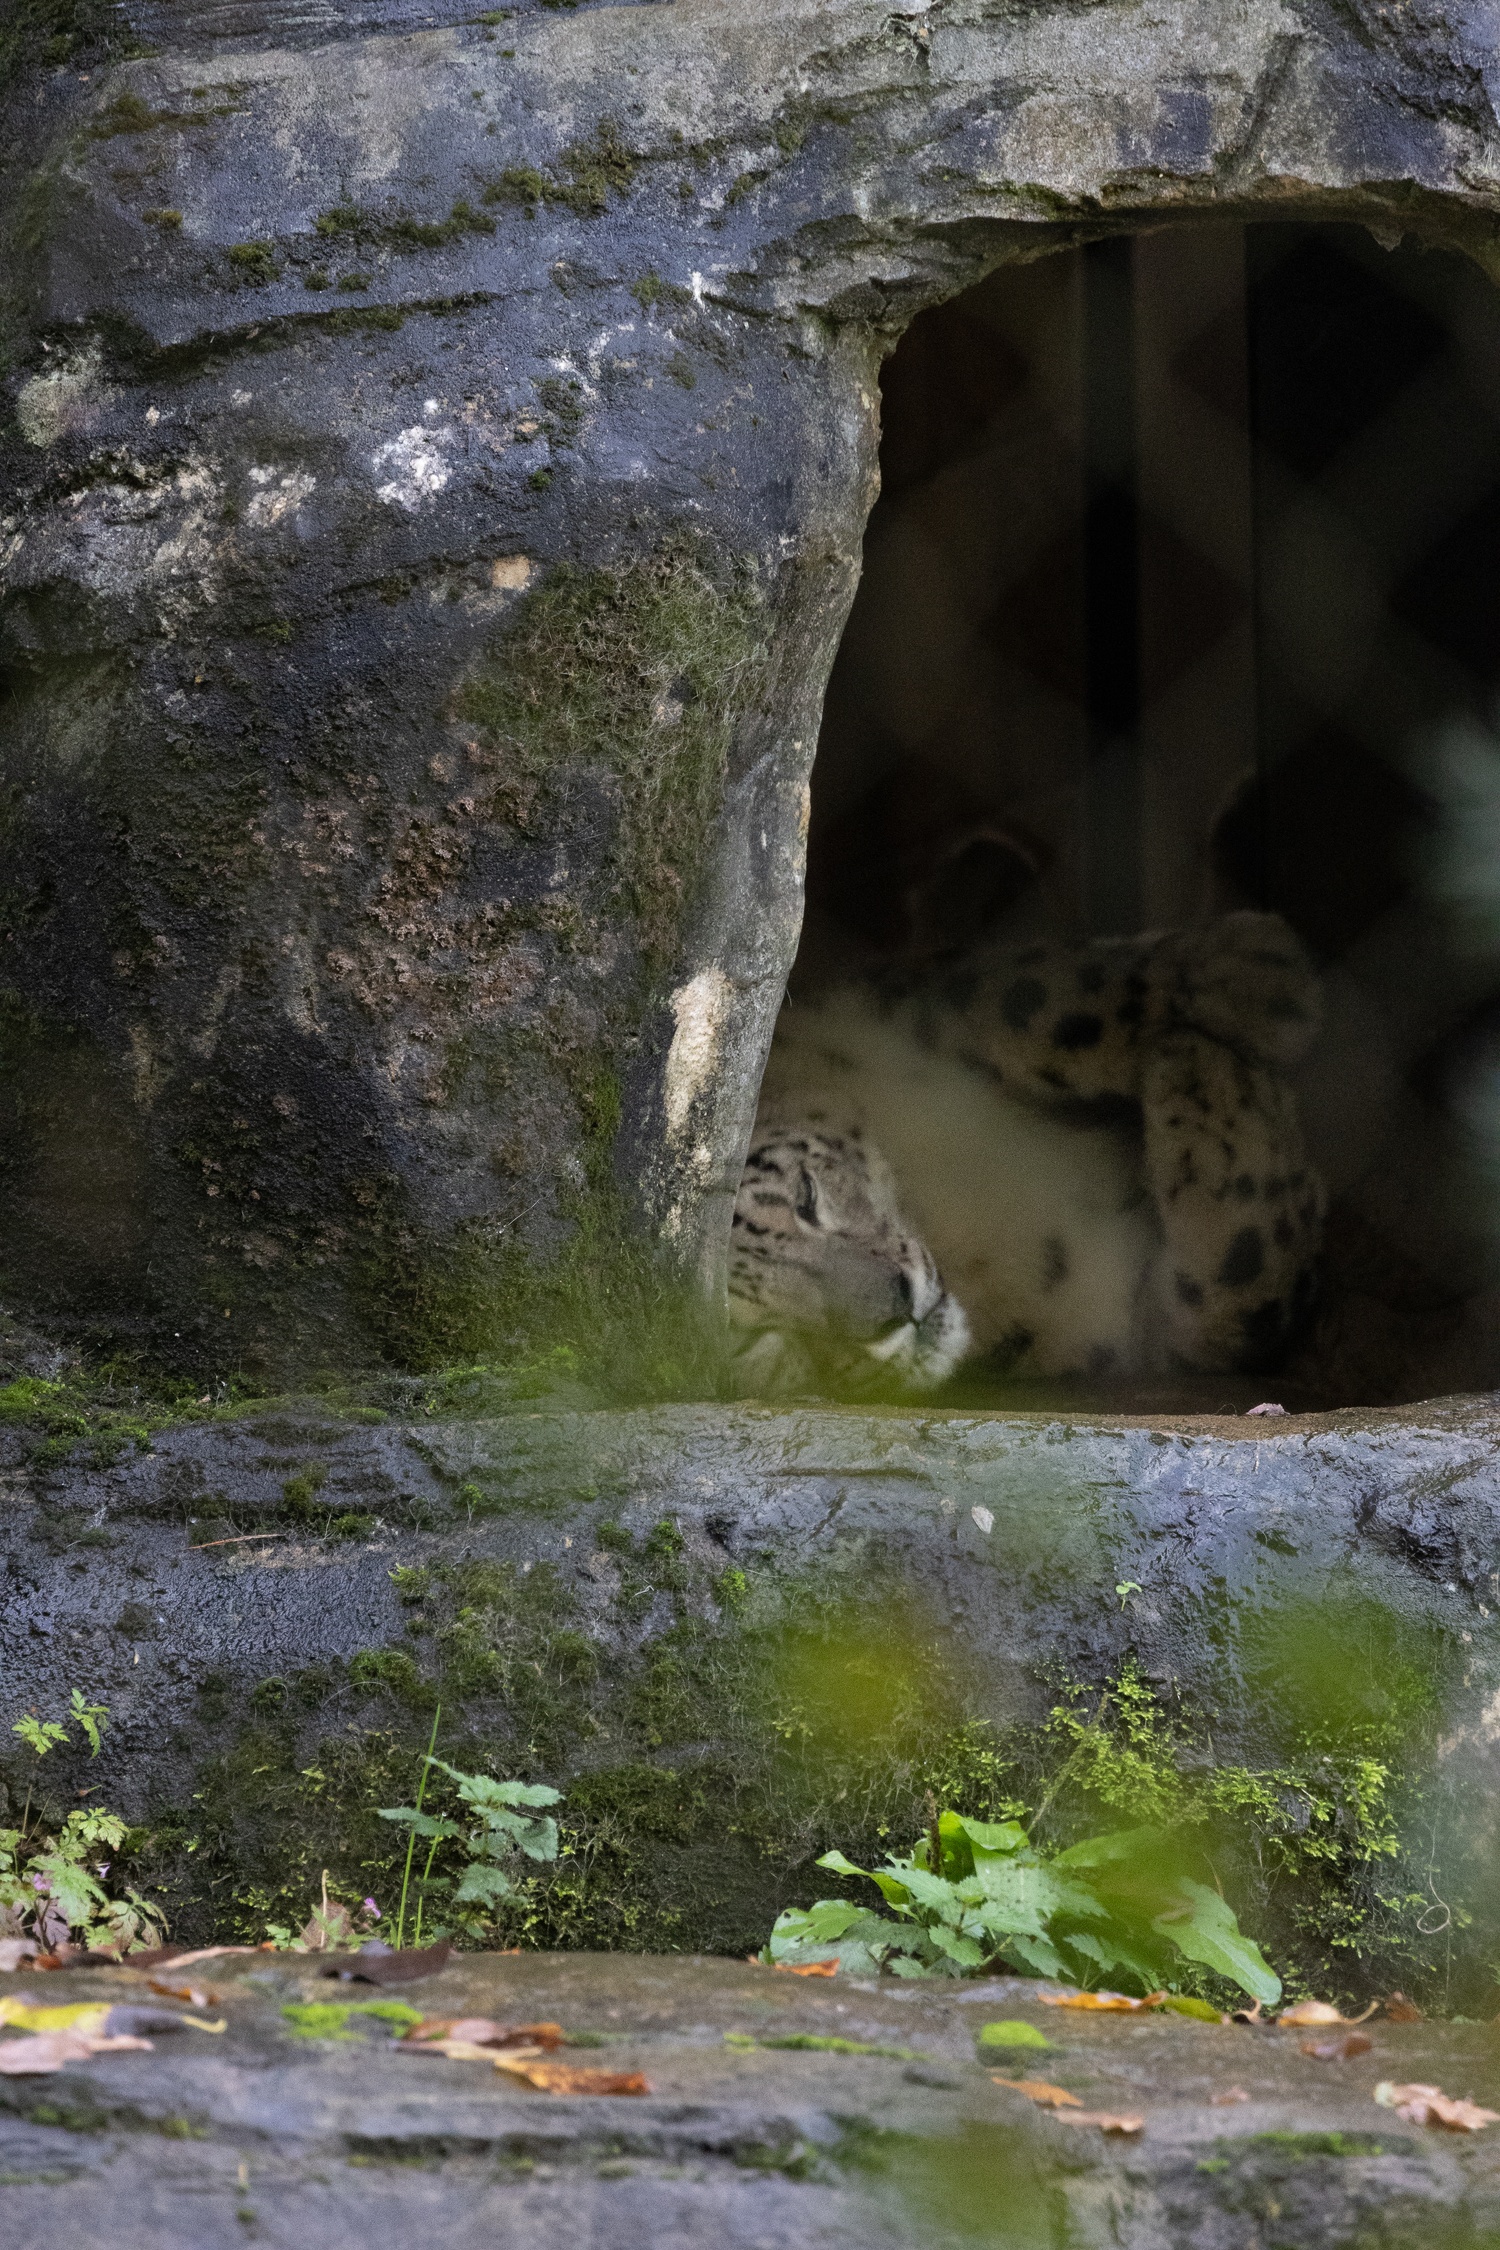 Snow leopard sitting in cave